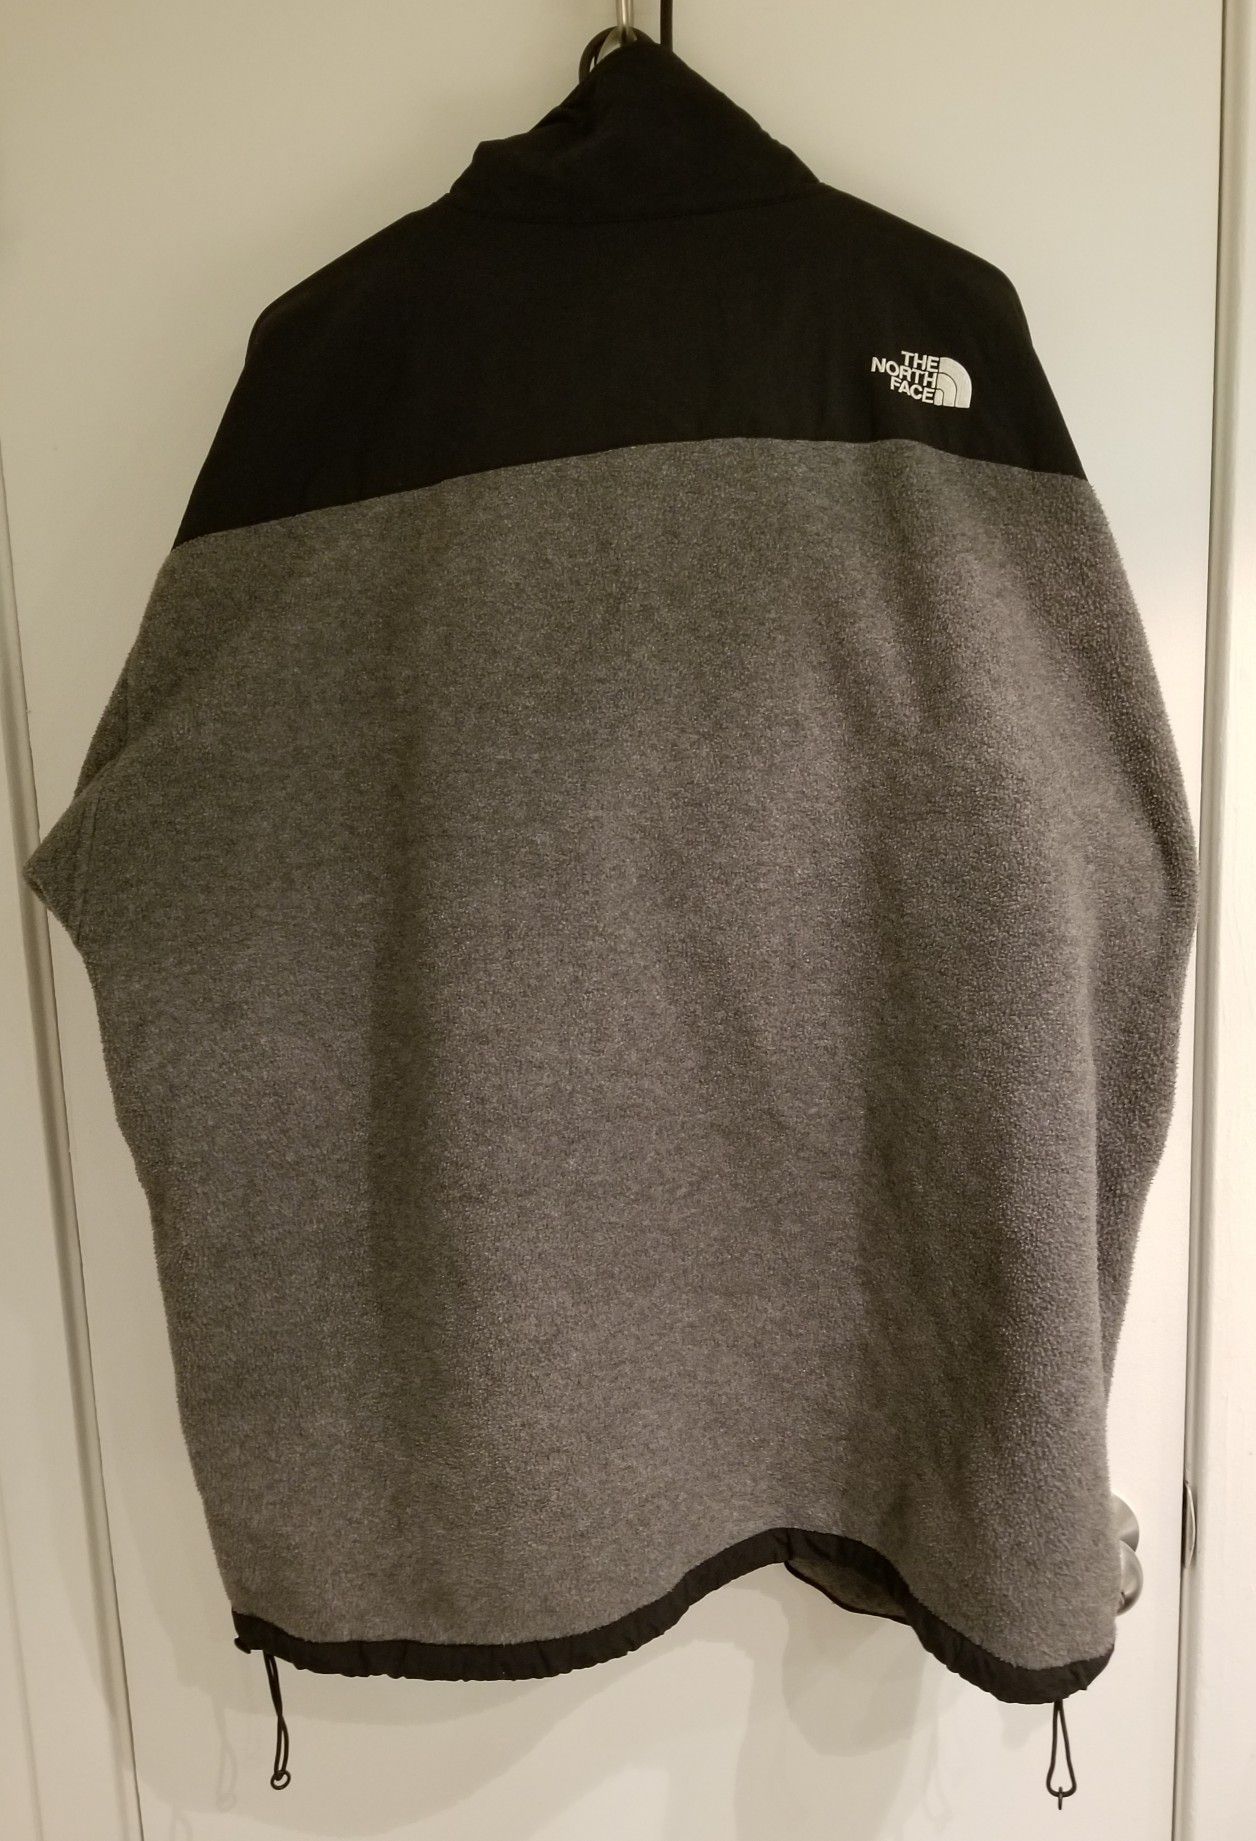 North Face Denali jacket, XXL, used in good condition